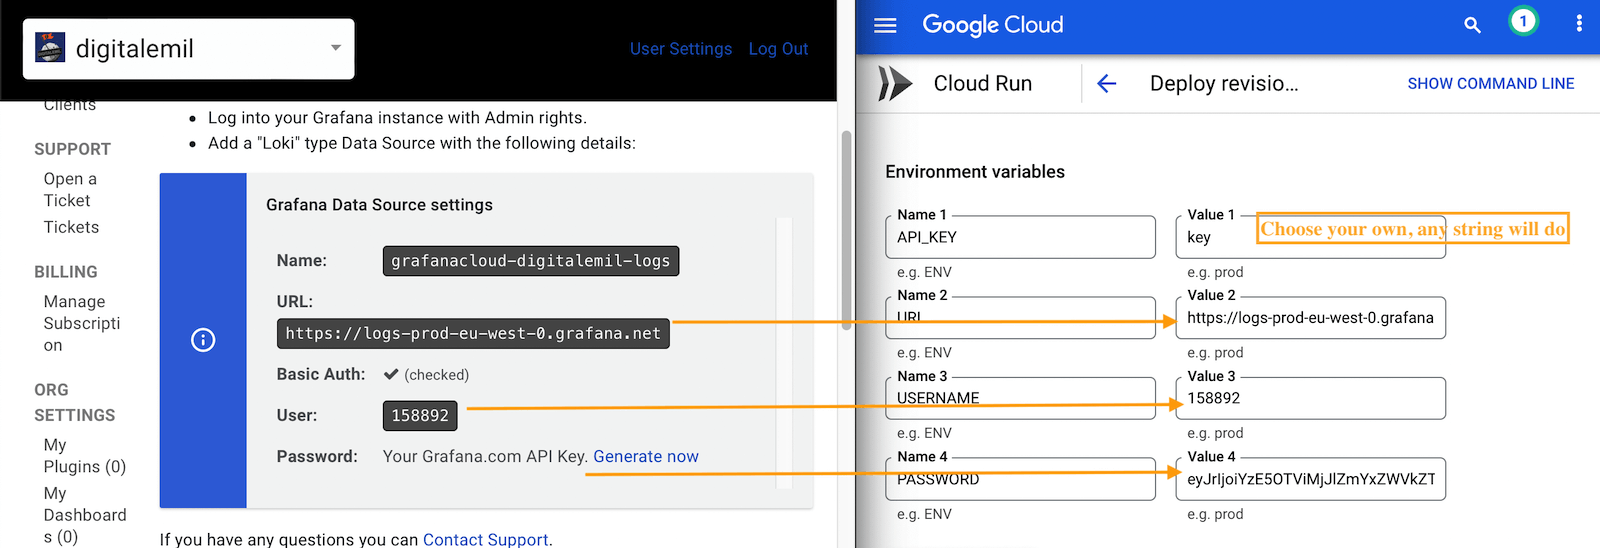 Setting the environment variables of the Cloud Run service